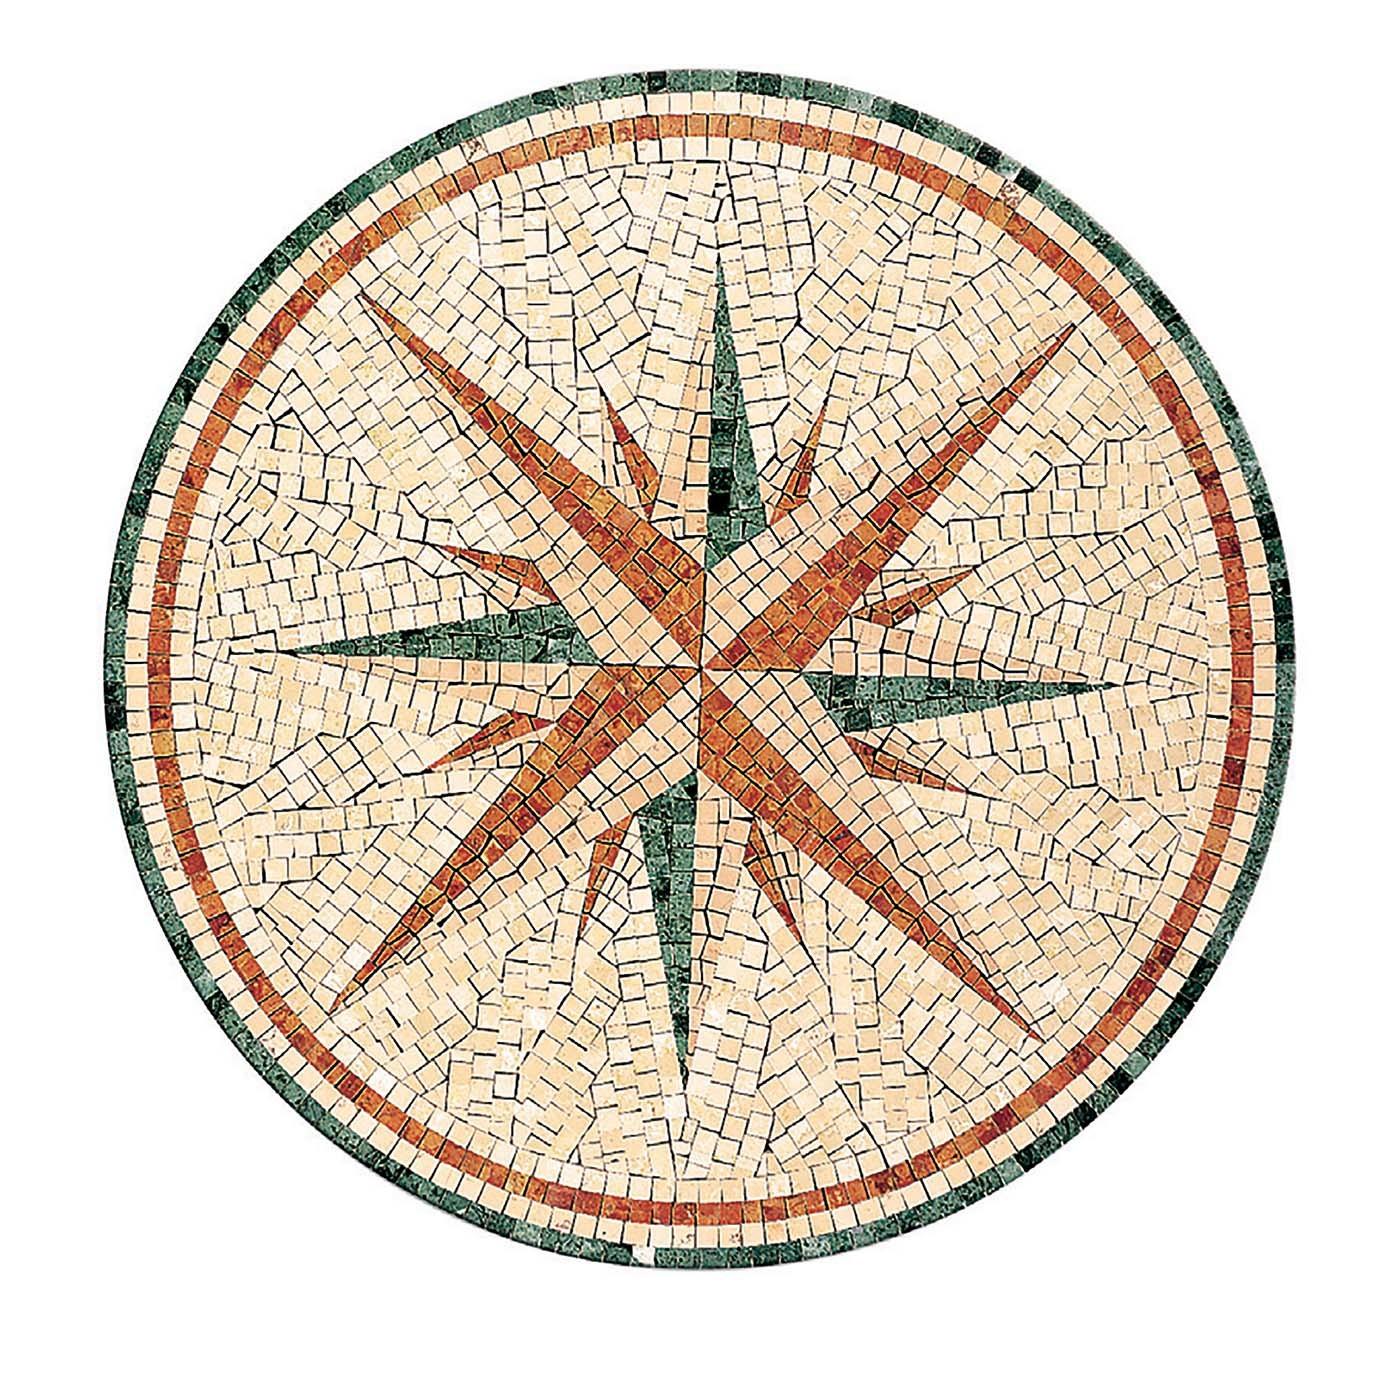 This artistic mosaic features a stunning rendition of a compass rose made from a combination of multicolored tesserae in the following marble: Botticino, Rosa Perlino, Rosso Verona, and Verde. A striking polished finish completes the style. The item